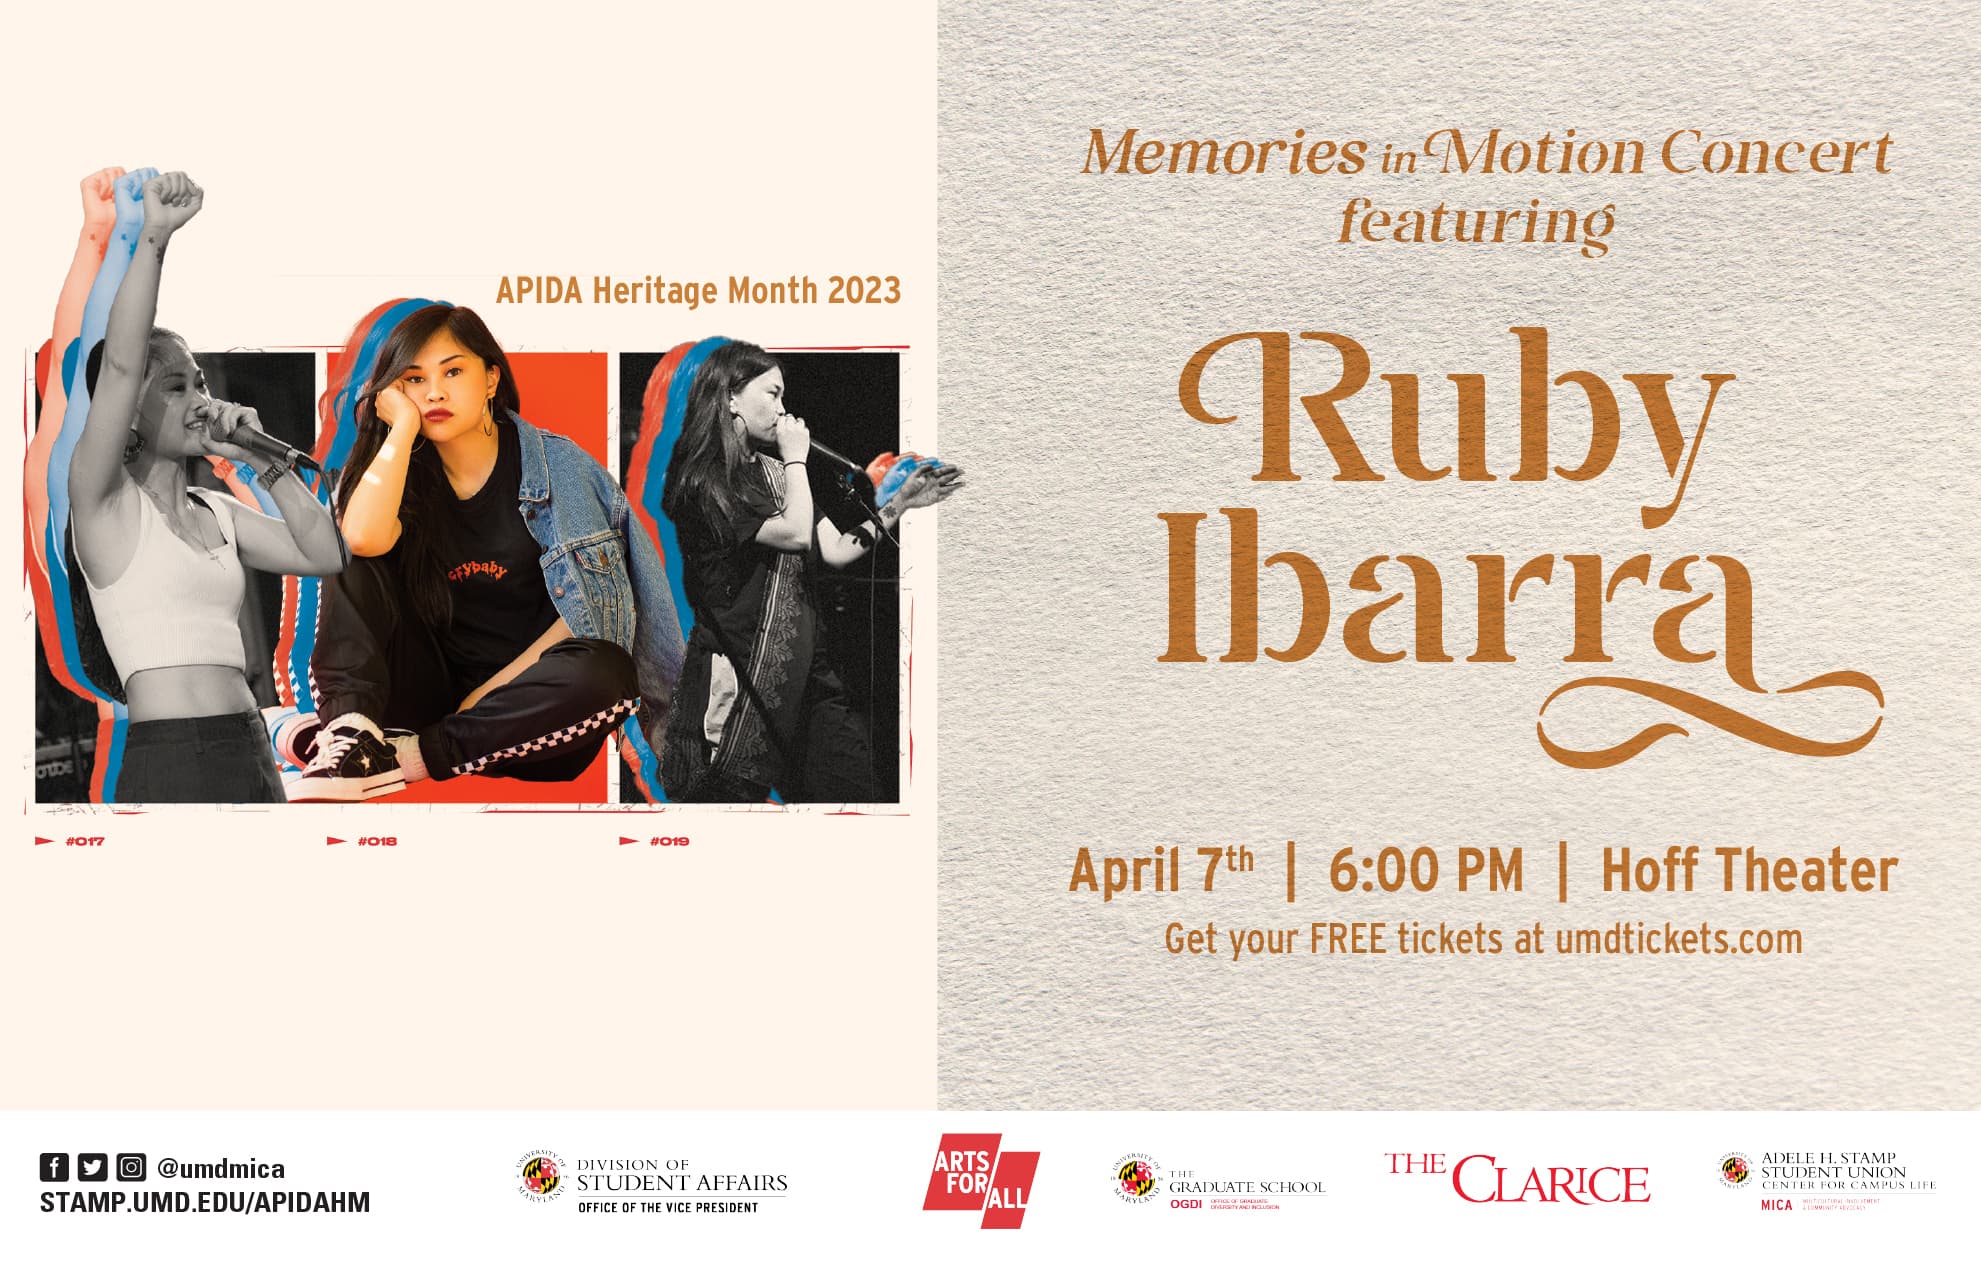 Free Concert Featuring Ruby Ibarra